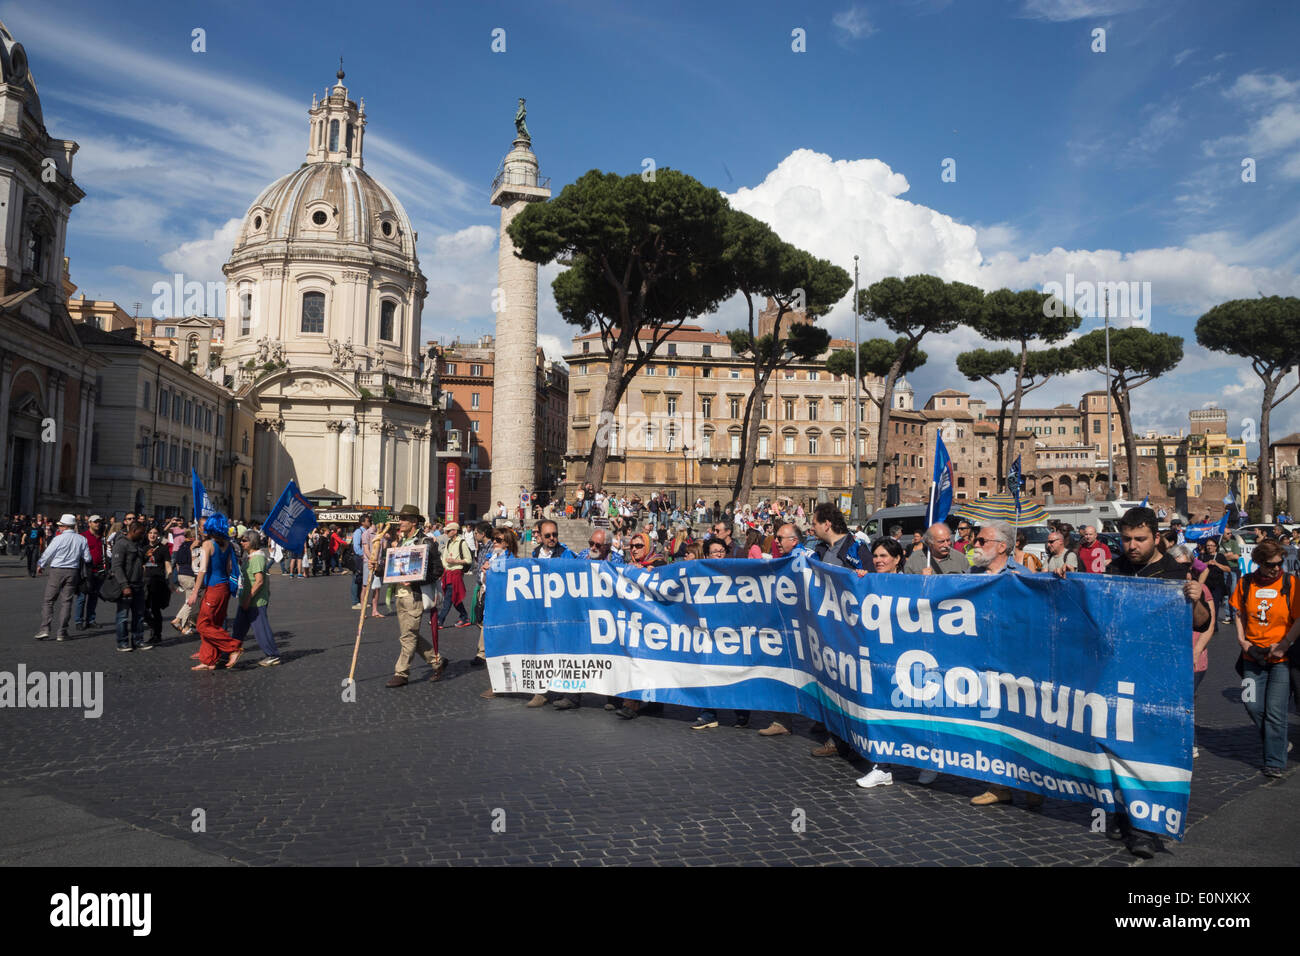 Rome, Italy, 17th May, 2014. Demonstration in Rome against austerity and public assets privatisation Credit:  Francesco Gustincich/Alamy Live News Stock Photo